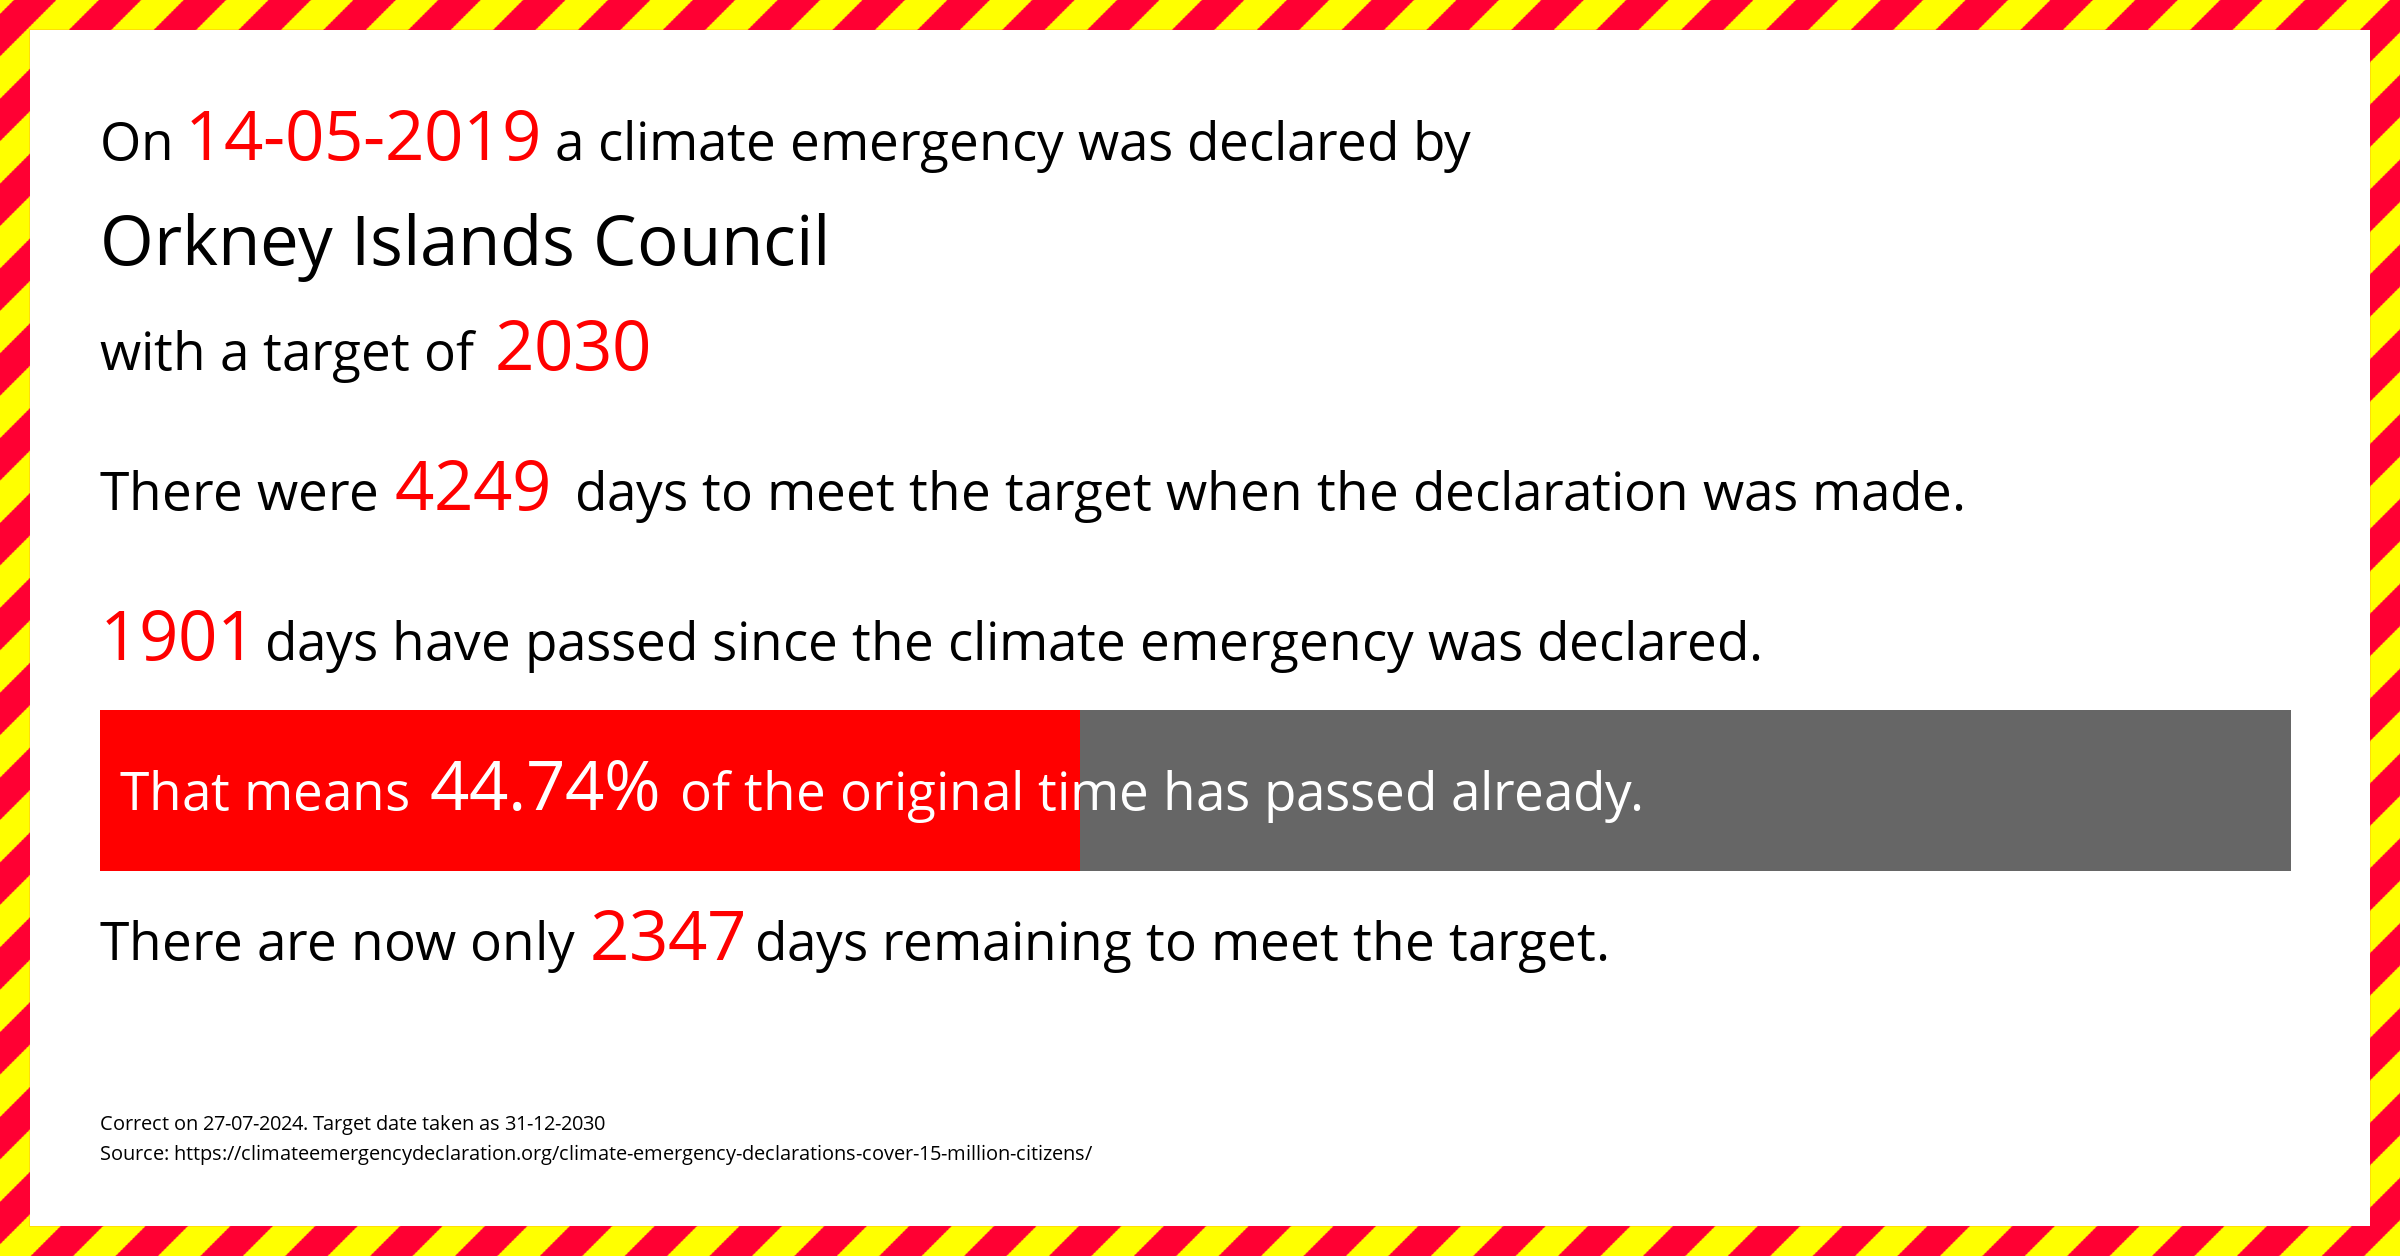 Orkney Islands Council declared a Climate emergency on Tuesday 14th May 2019, with a target of 2030.